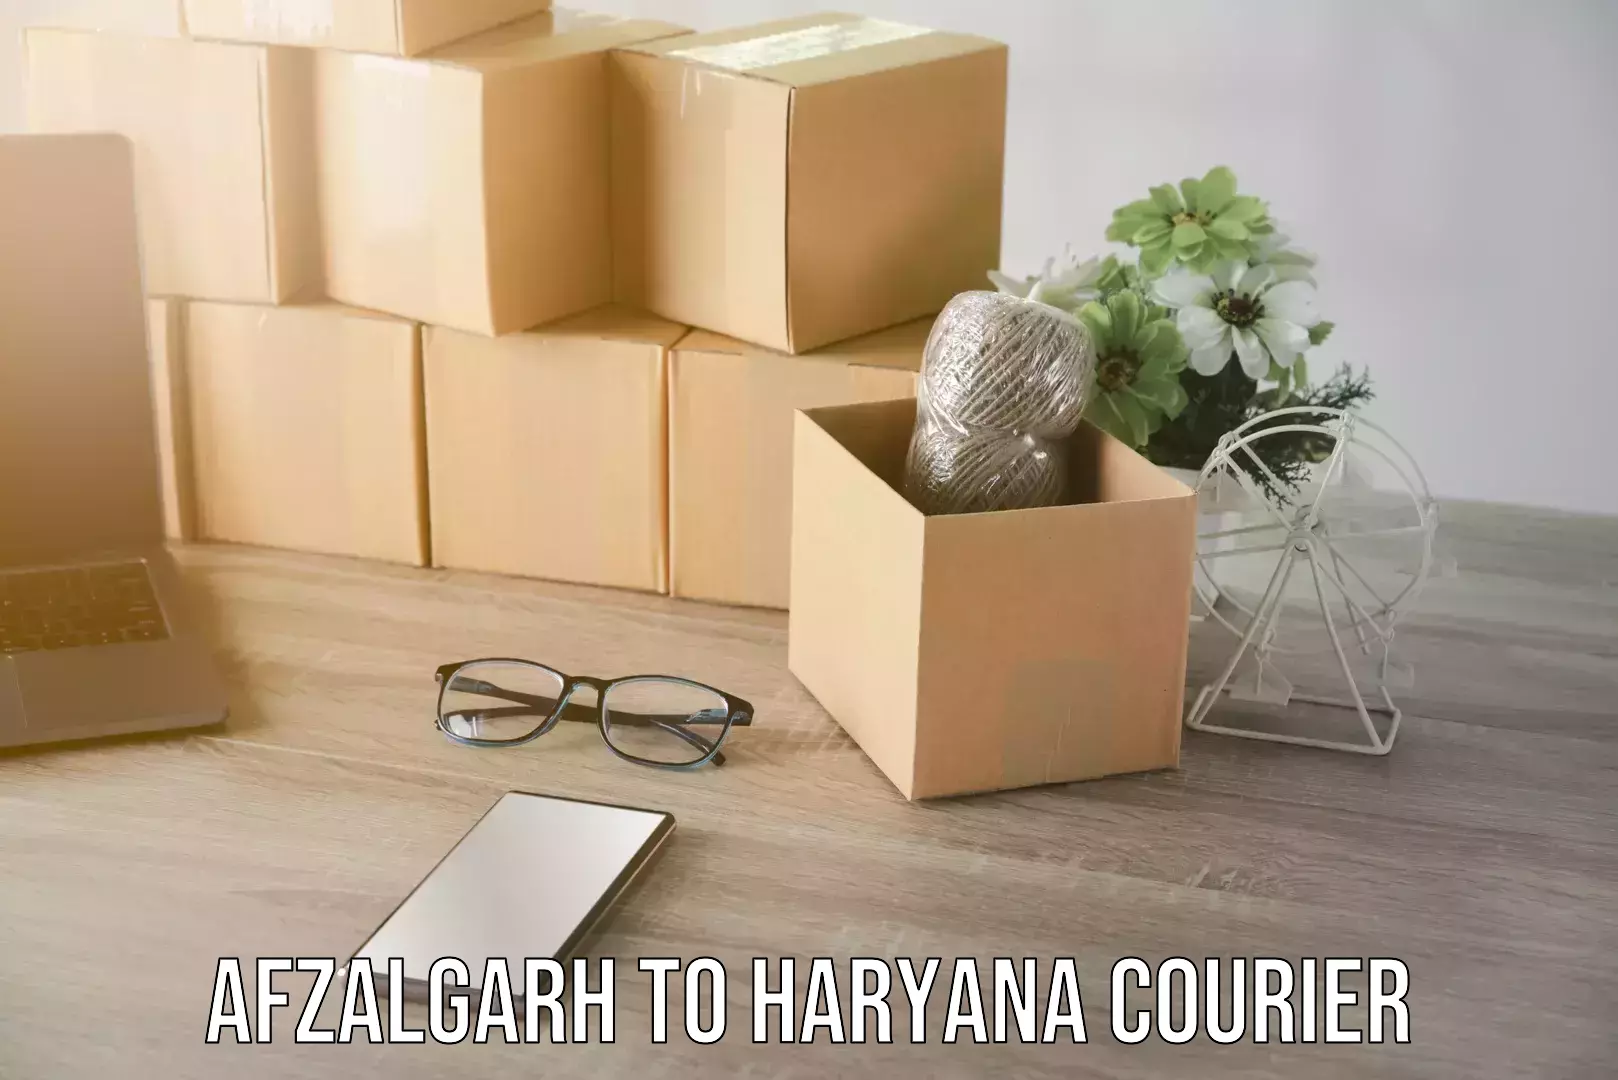 24-hour delivery options Afzalgarh to Haryana